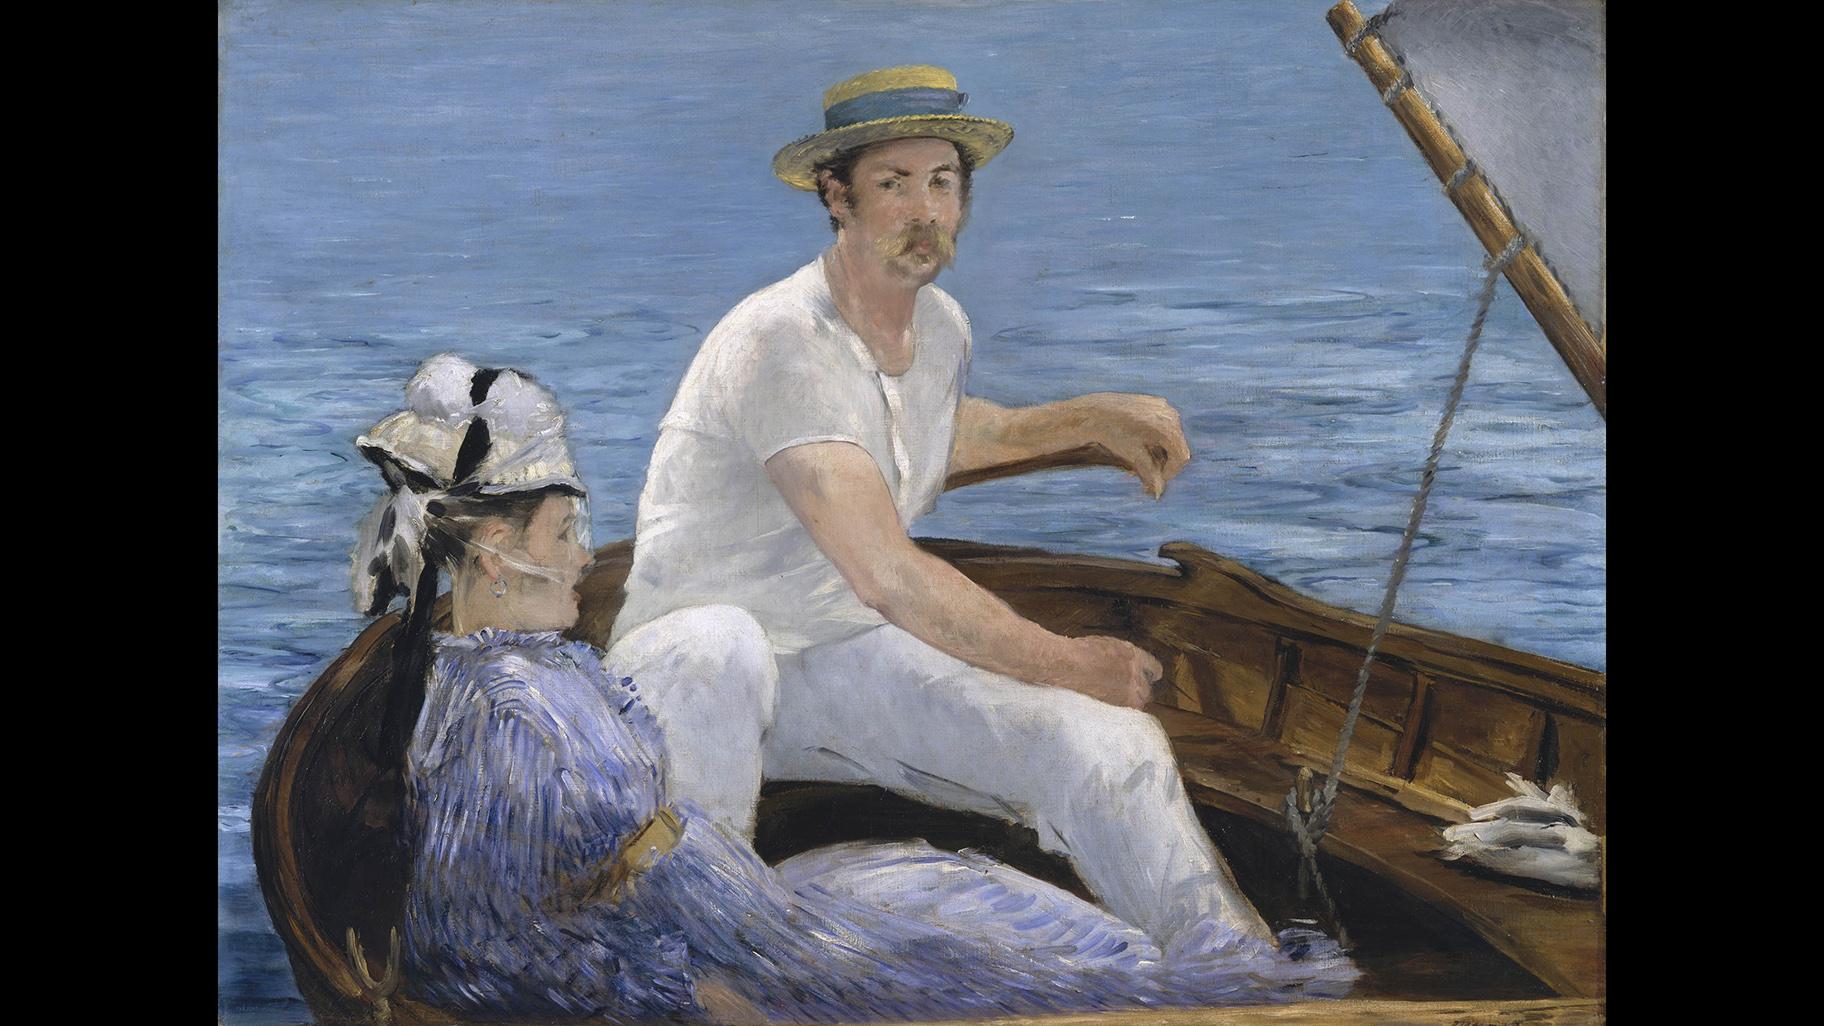 Édouard Manet. “Boating,” 1874–75. The Metropolitan Museum of Art, New York, H. O. Havemeyer Collection, Bequest of Mrs. H. O. Havemeyer, 1929.